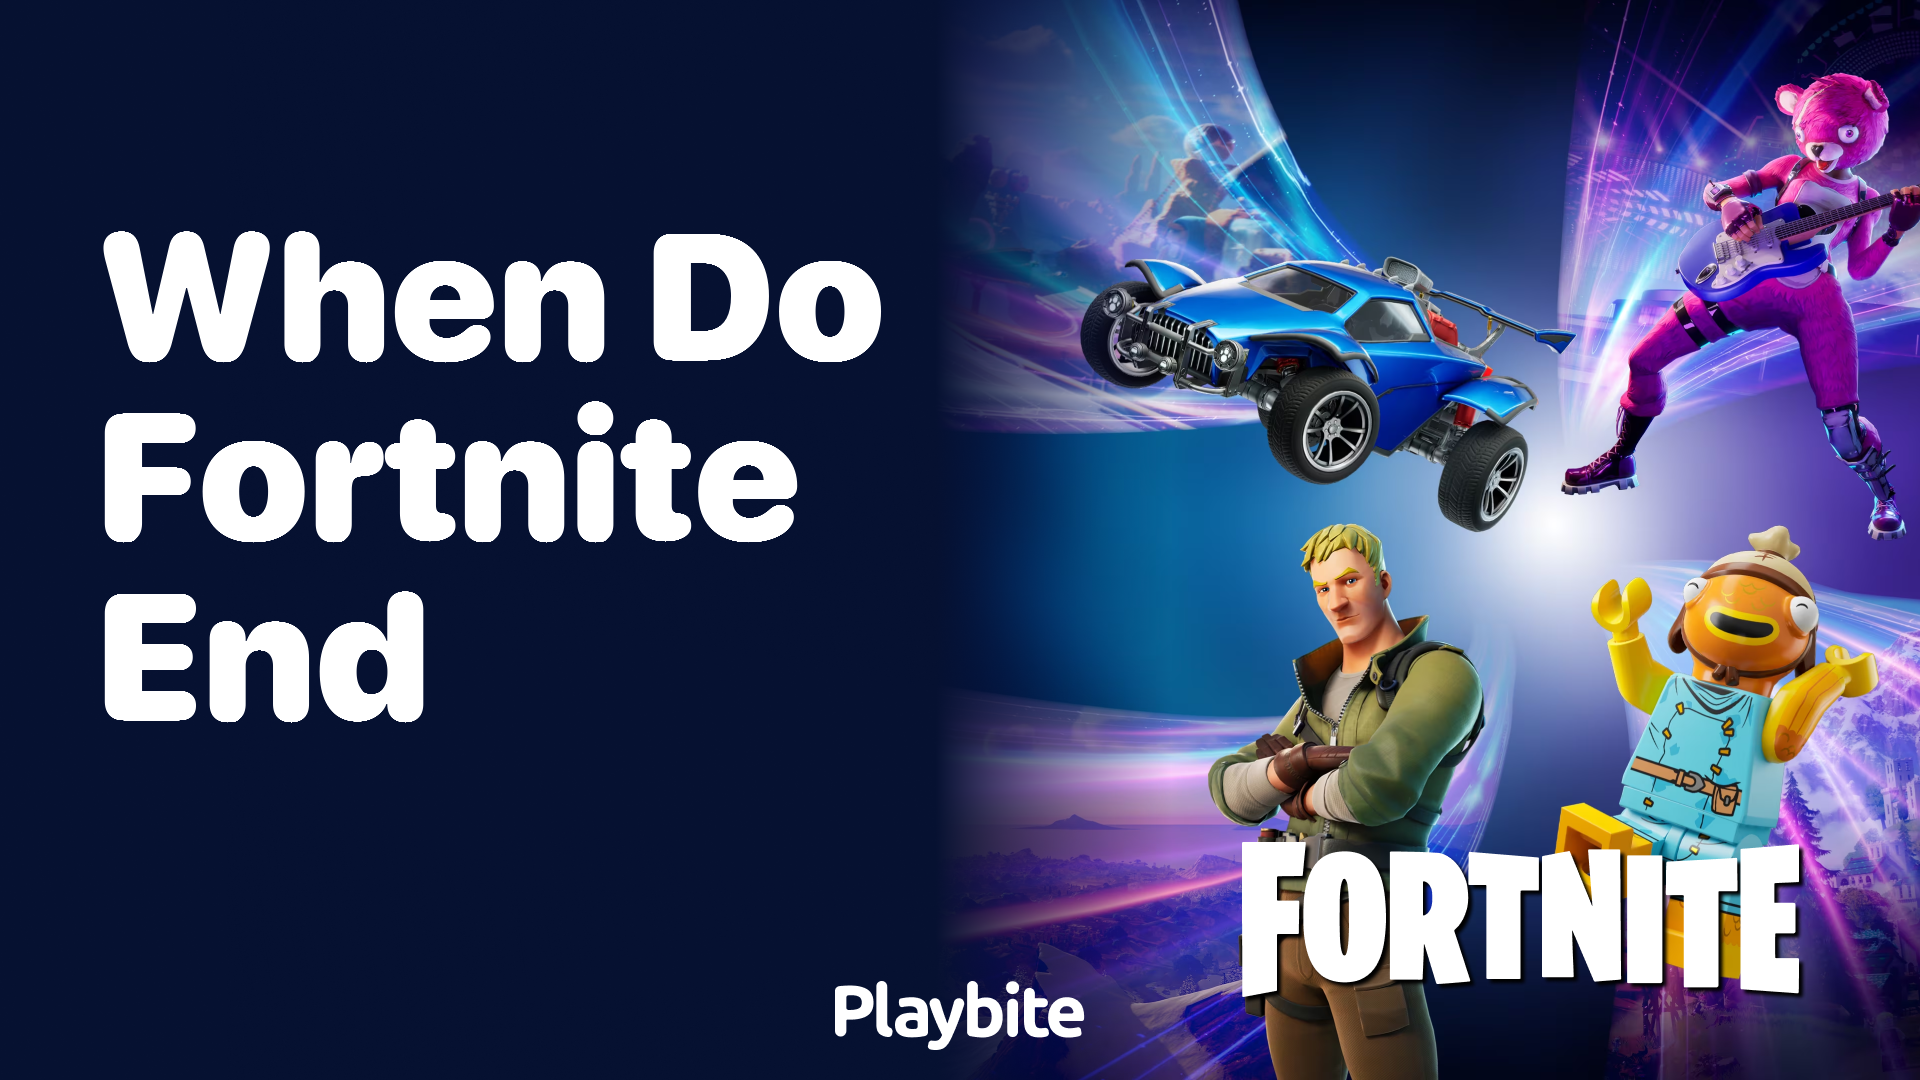 Does Fortnite Ever End? Find Out Now!